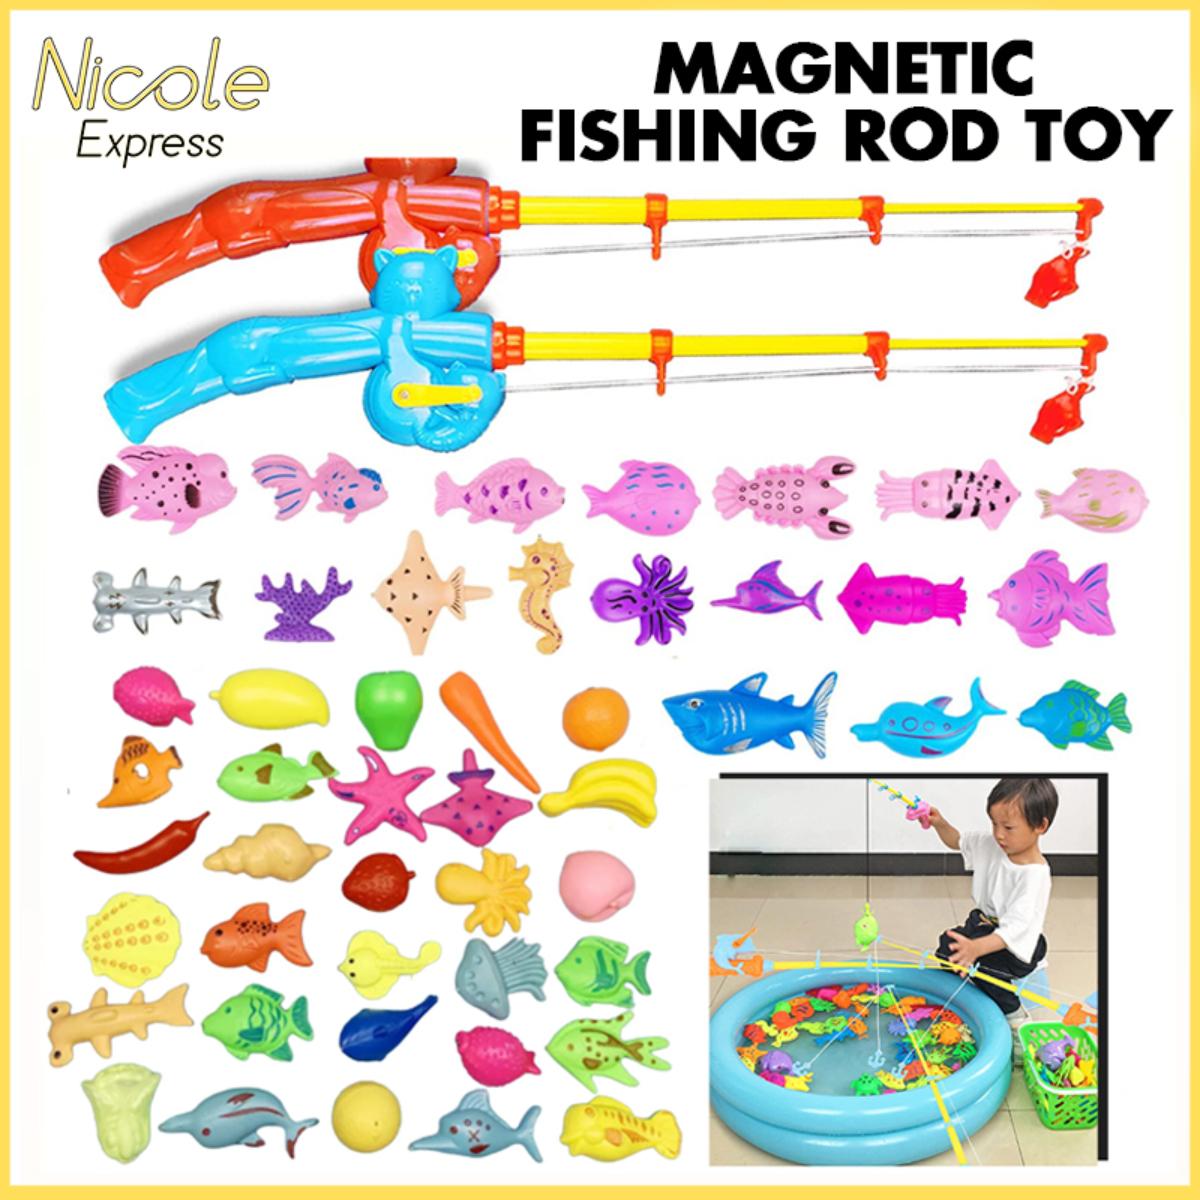 Magnetic Fishing Rod Toy for Kids Children's Unisex Water Playing Toy